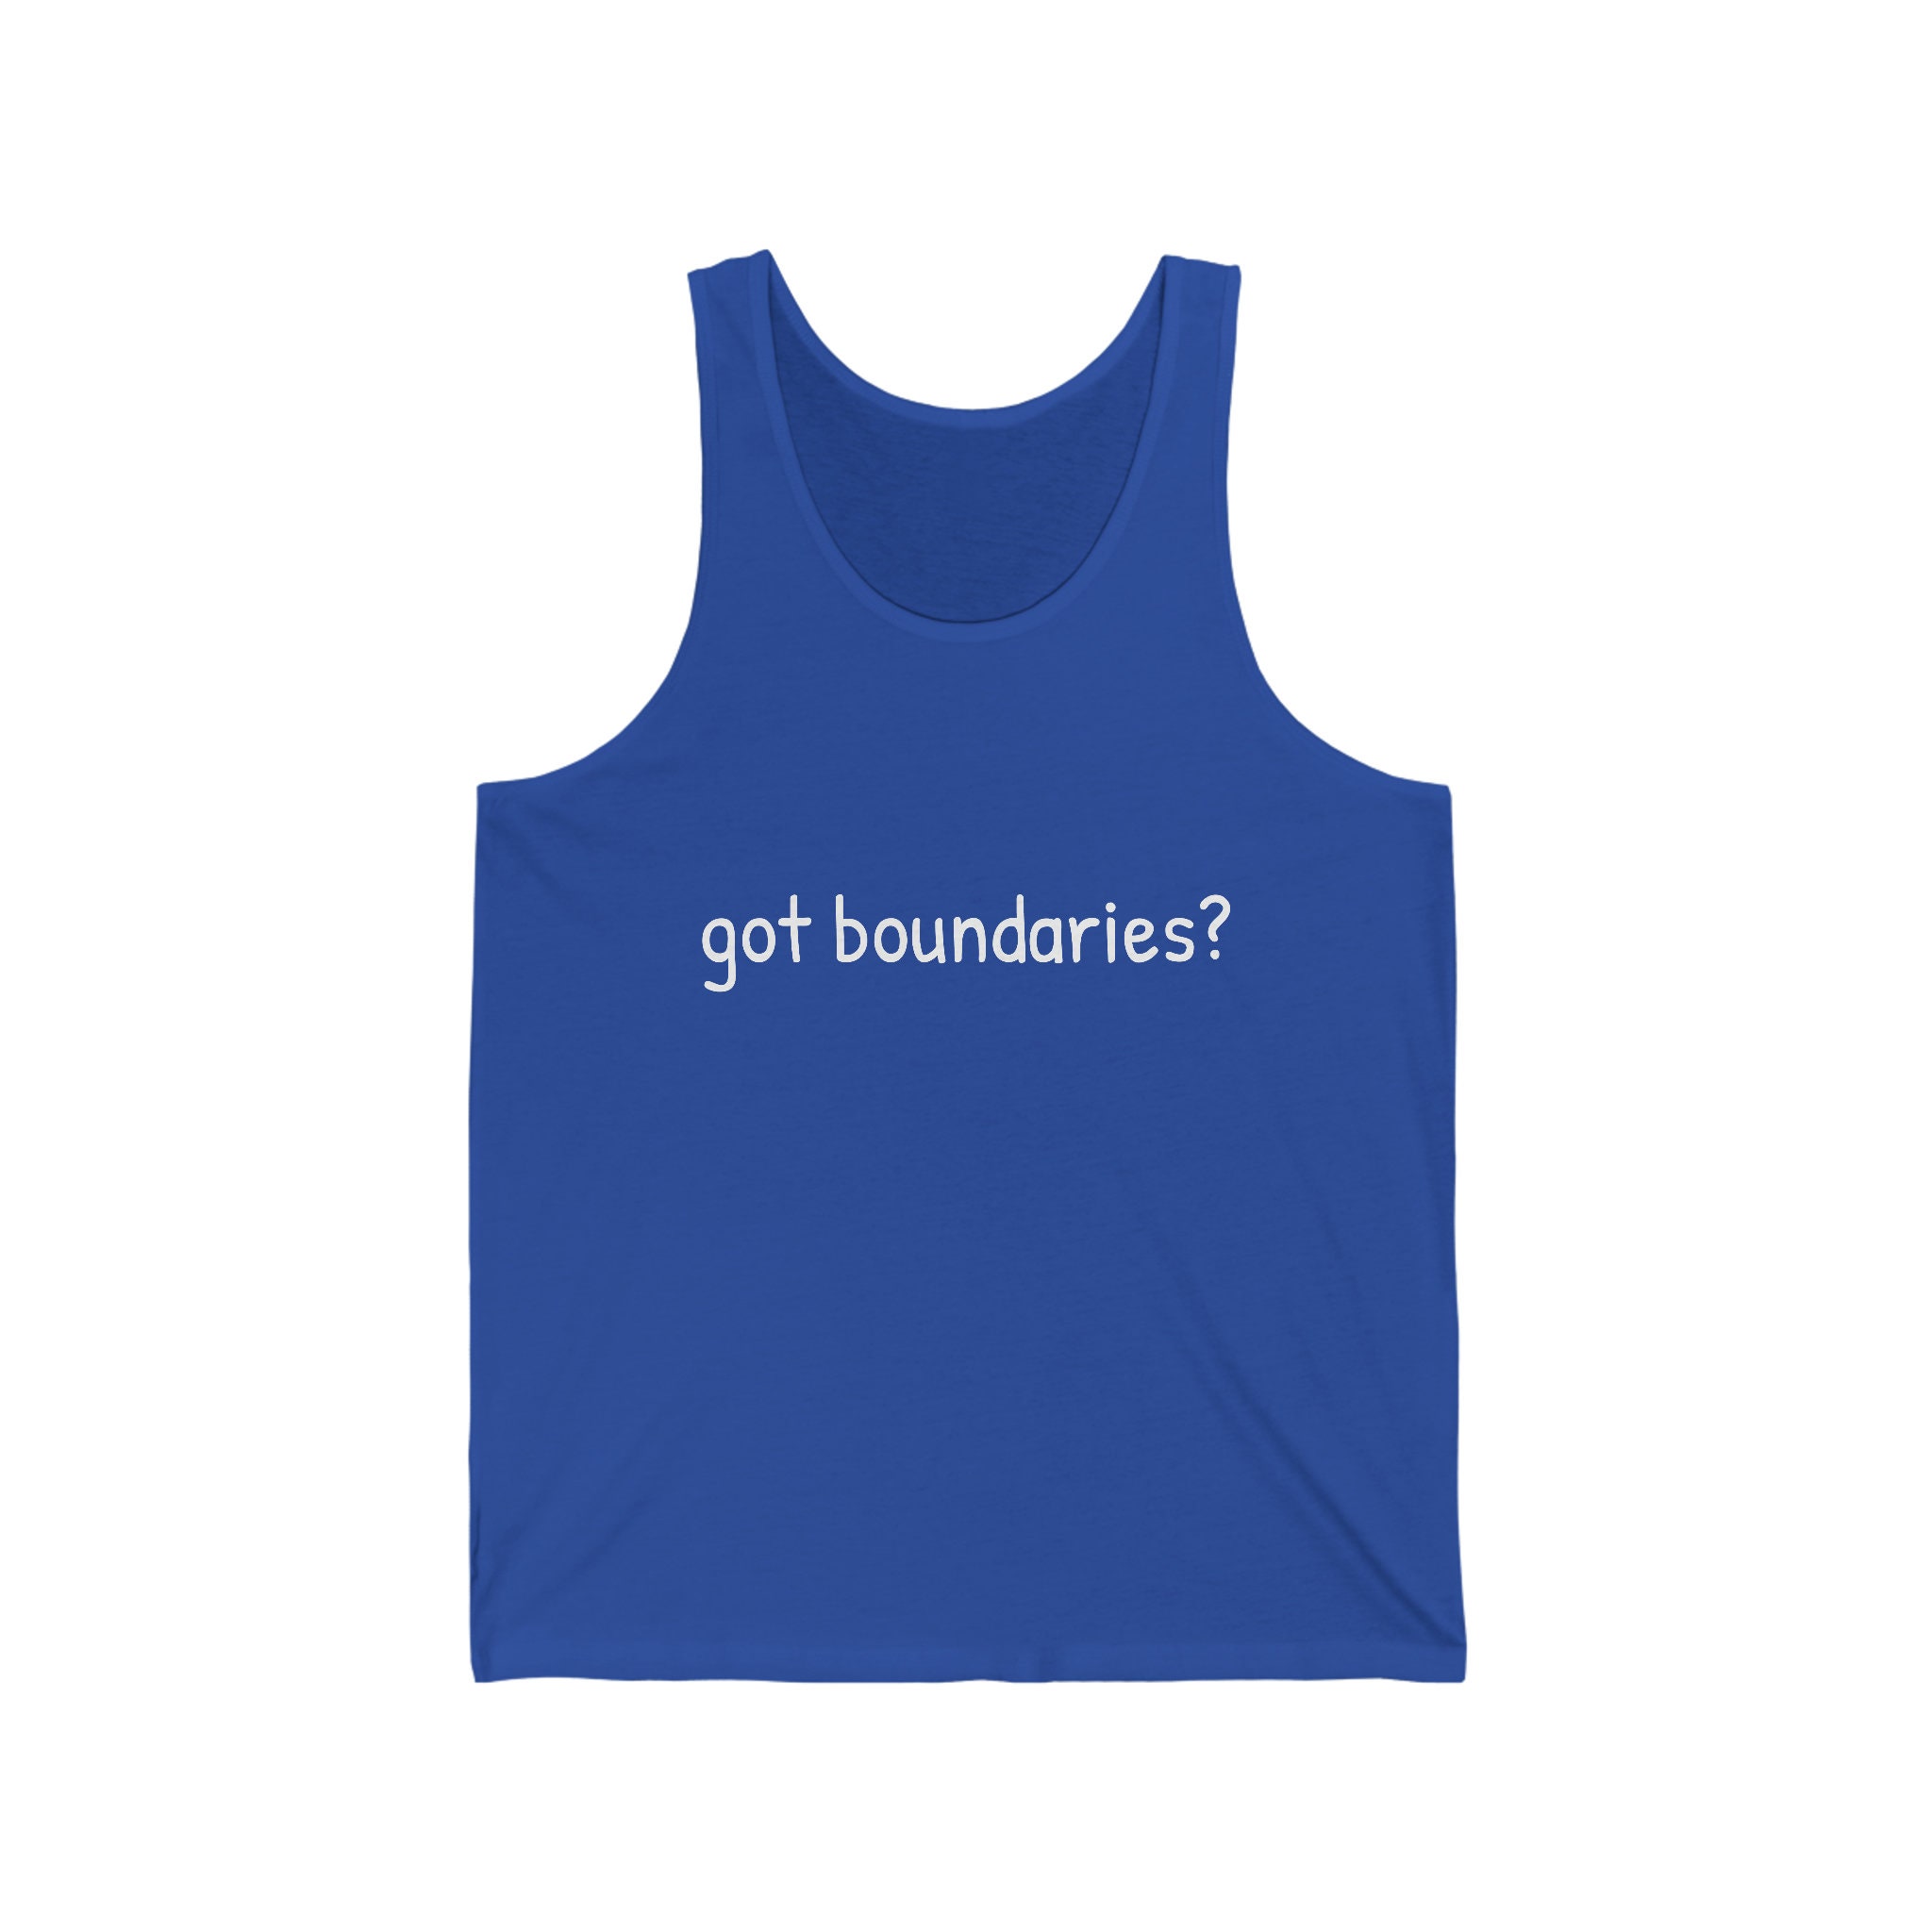 No Boundaries Hand-Painted Tank Tops for Women